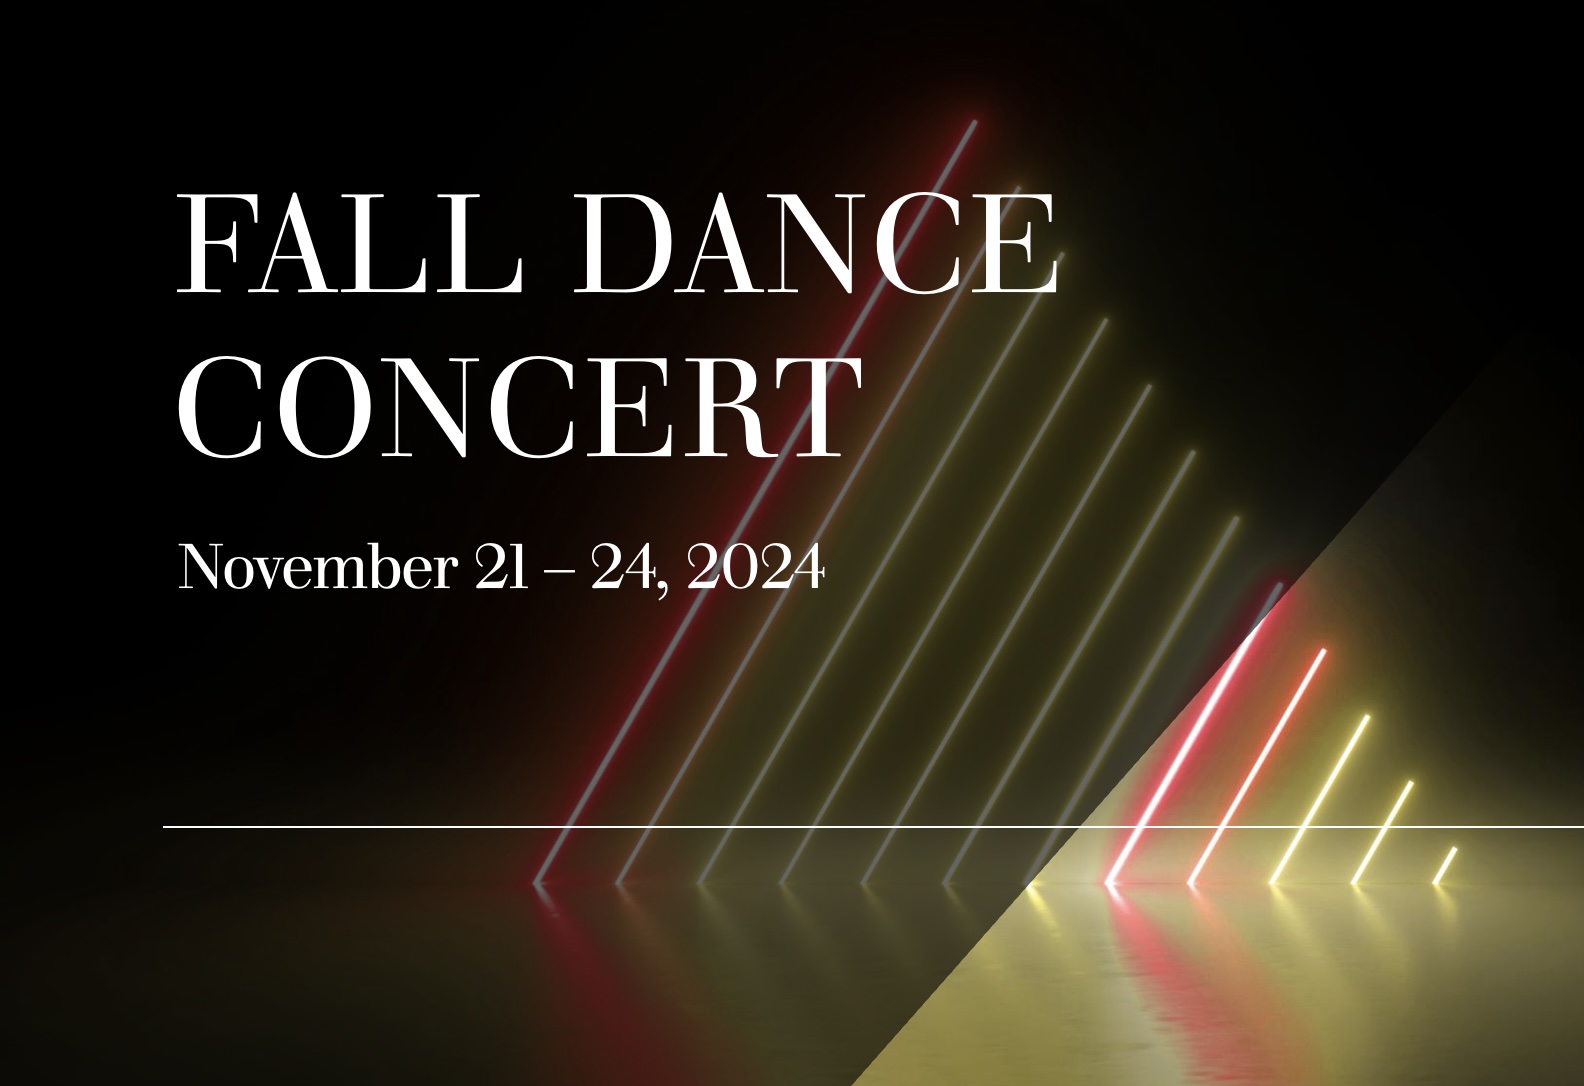 Fall Dance Concert Graphic